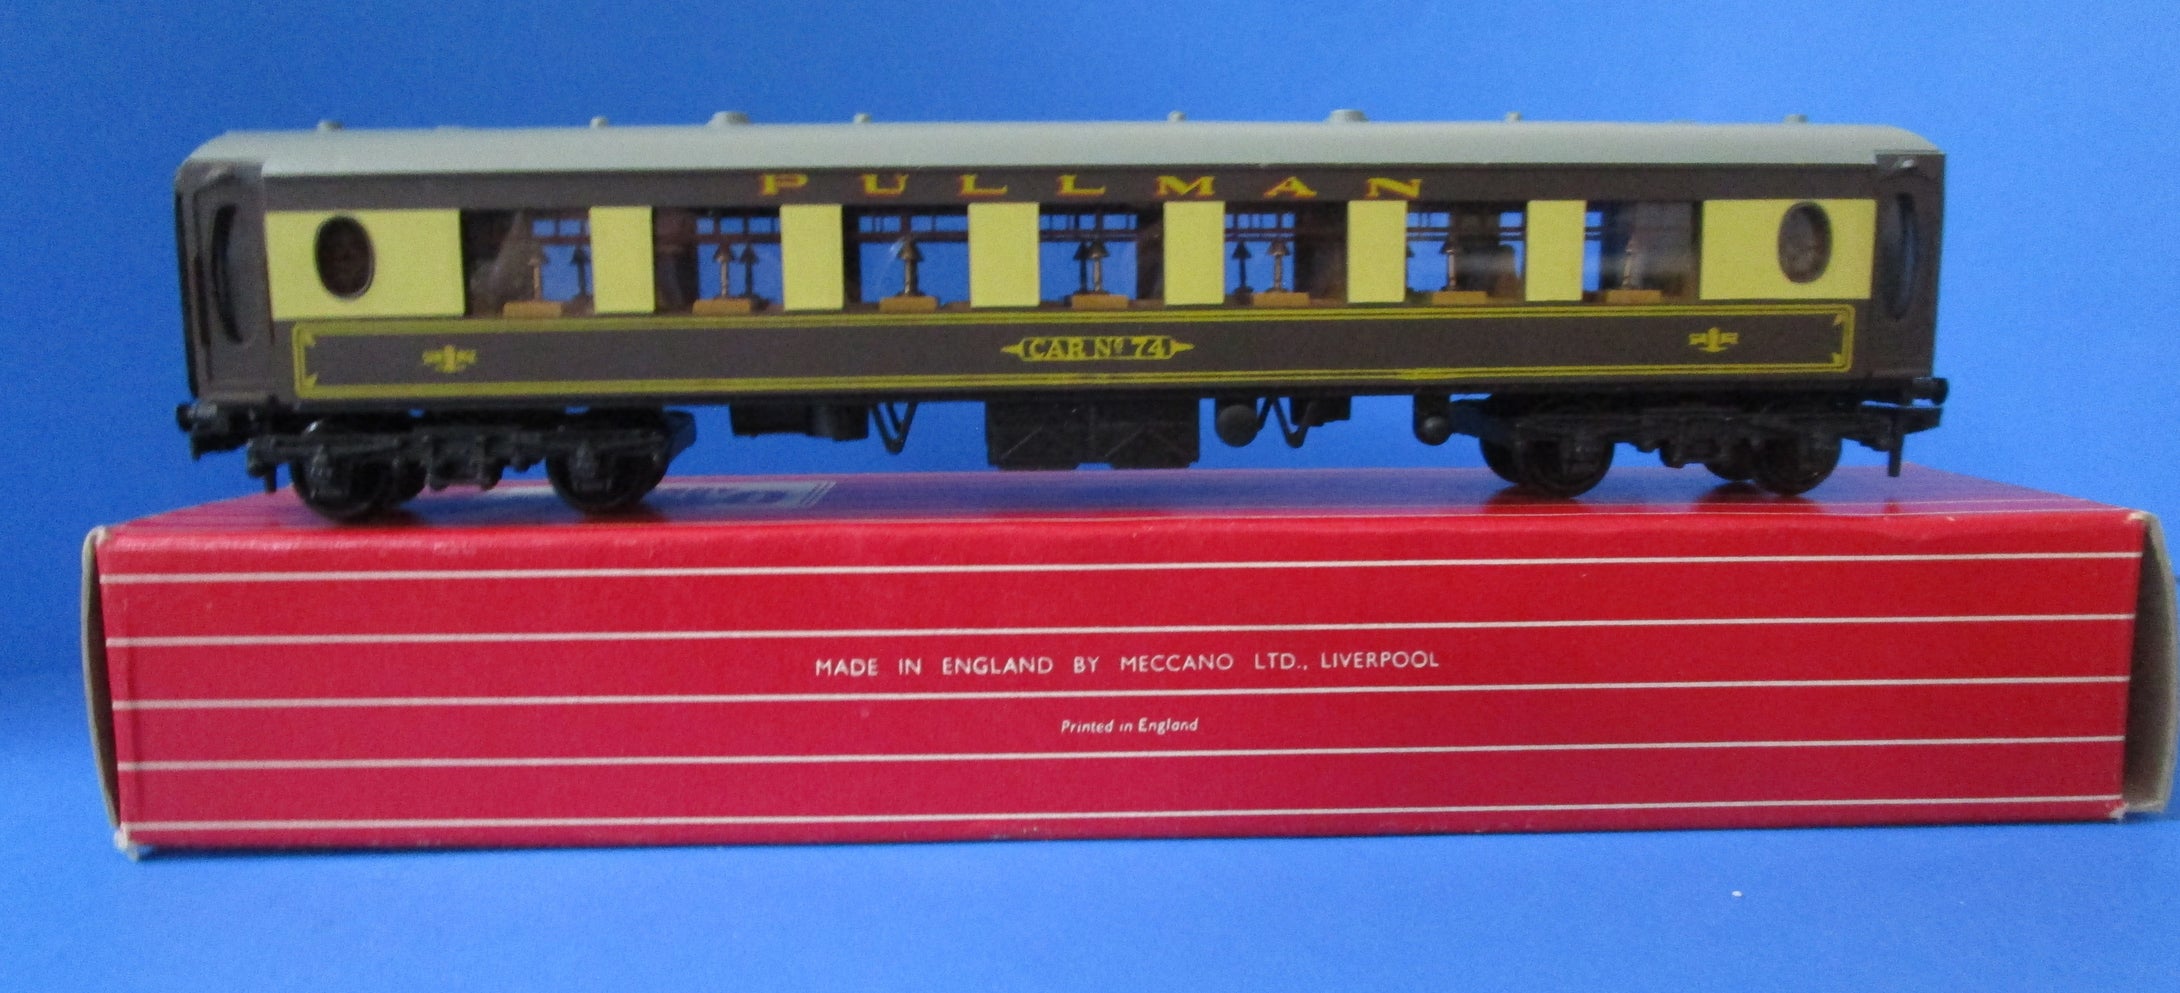 HD-4036  HORNBY DUBLO Pullman Car No. 74 2nd Class with interior fittings - BOXED